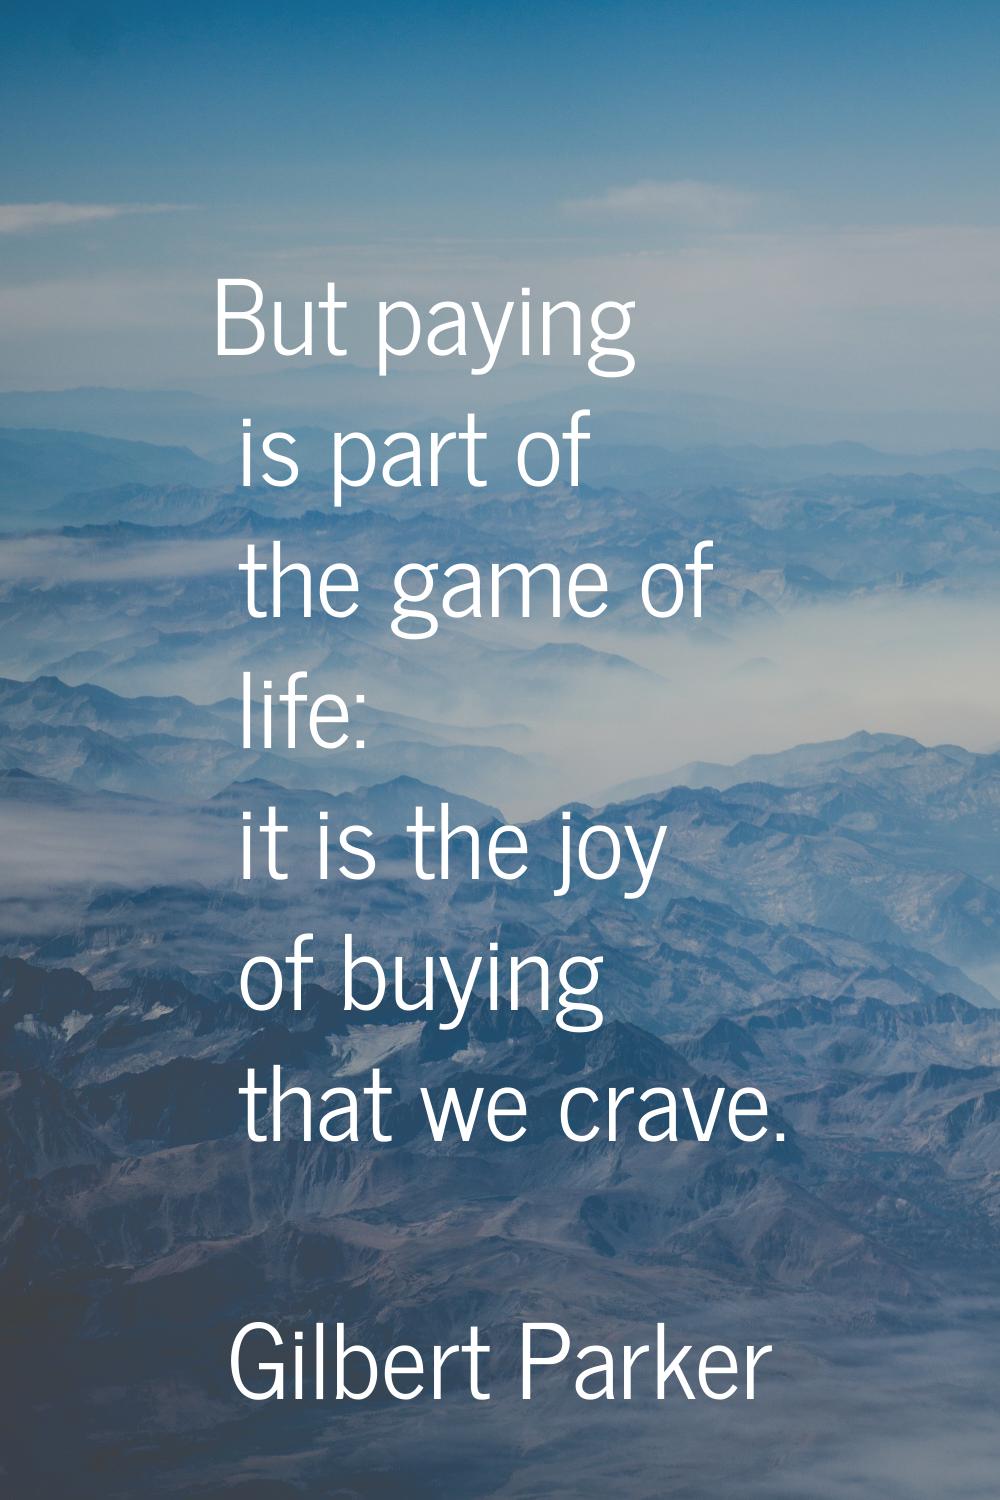 But paying is part of the game of life: it is the joy of buying that we crave.